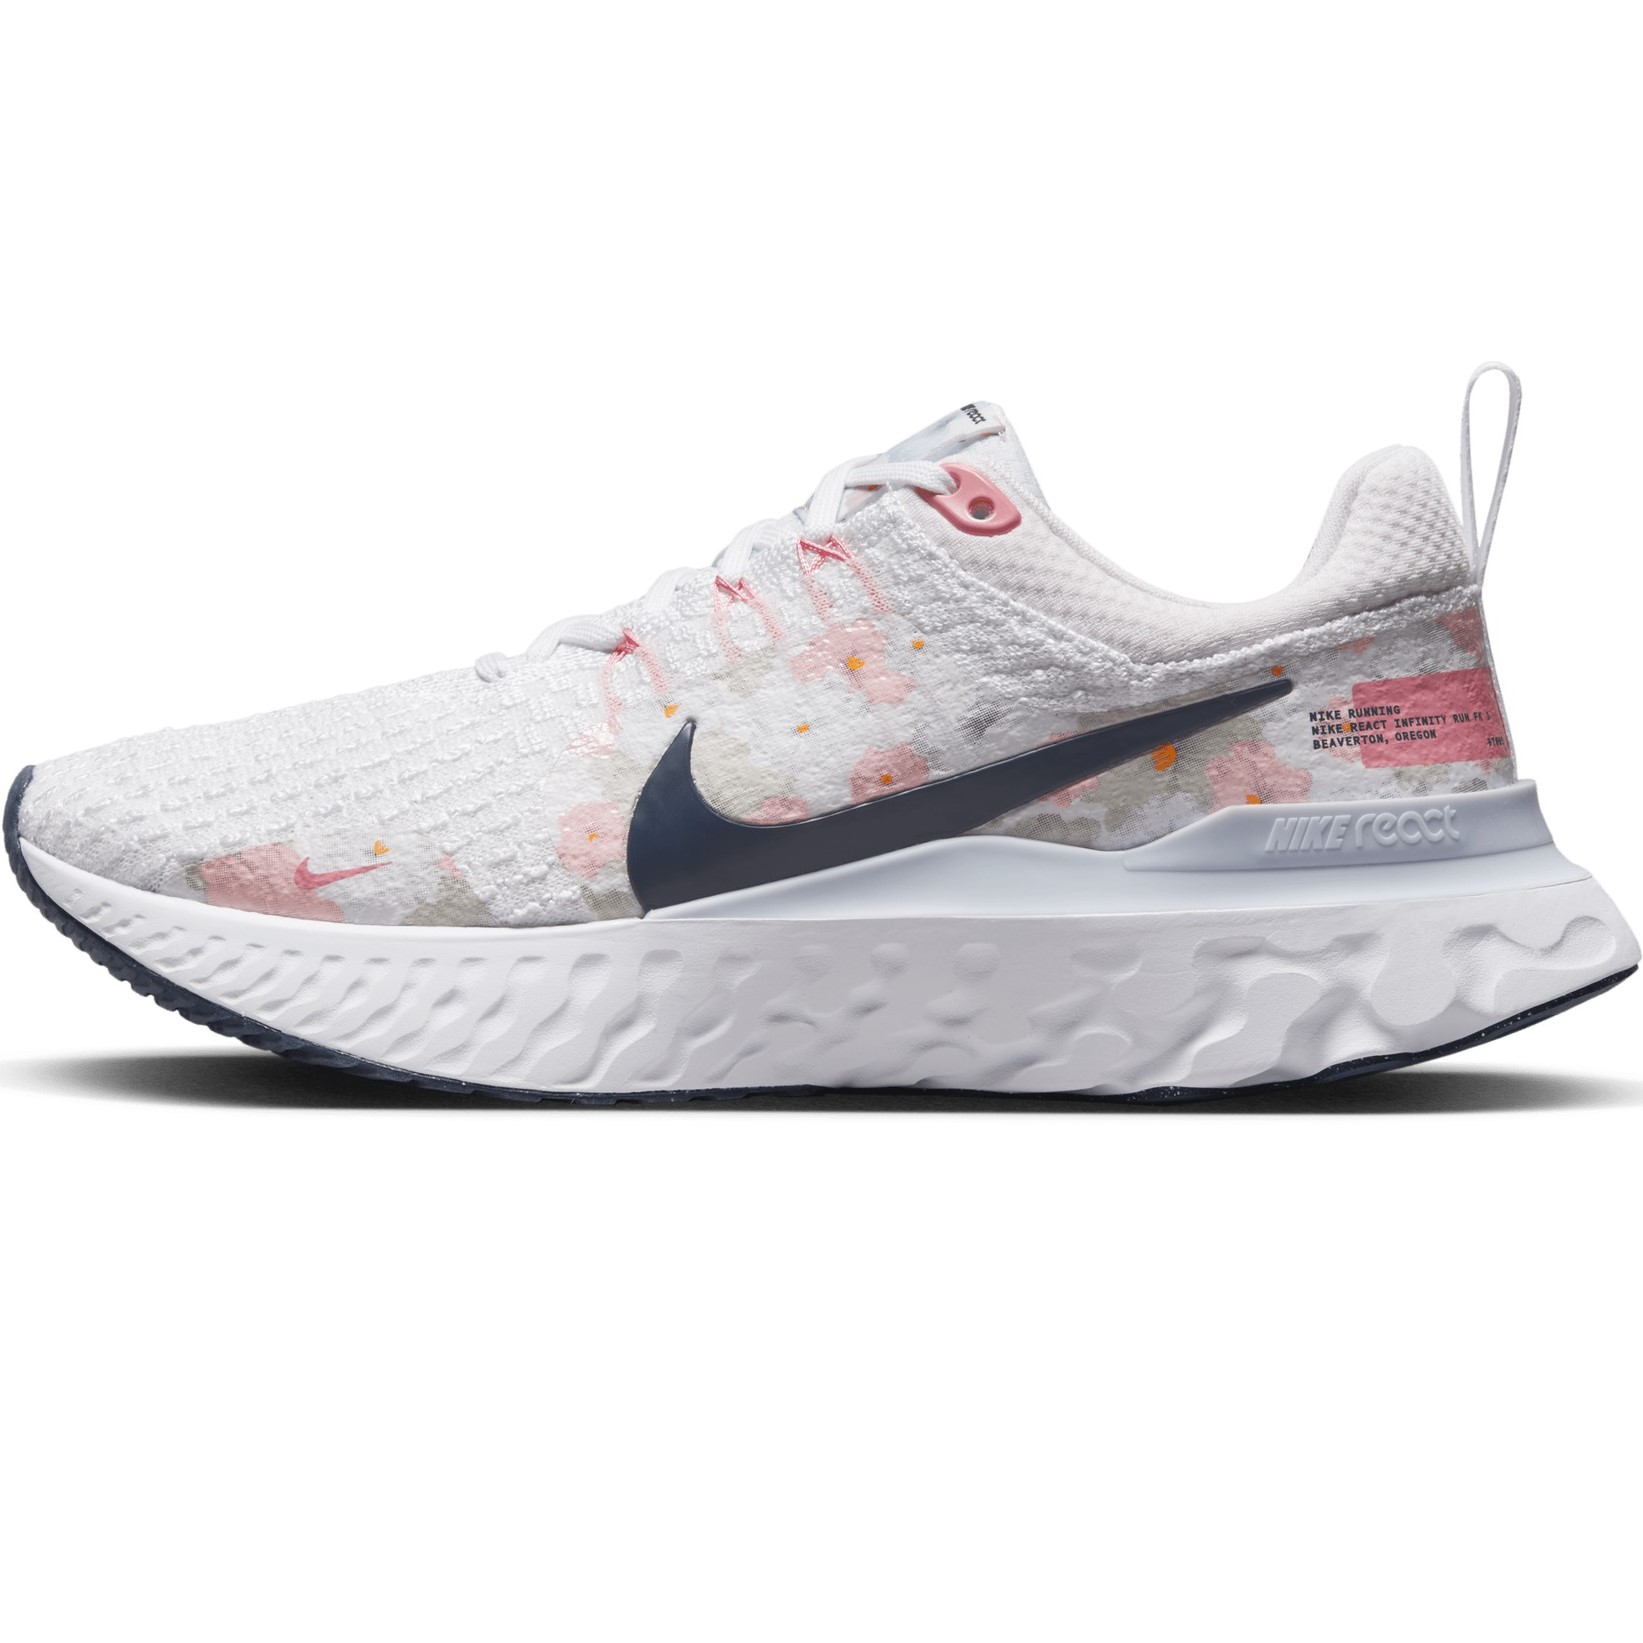 GIÀY NIKE NỮ REACT INFINITY 3 PREMIUM WHITE PEARL PINK WOMENS ROAD RUNNING SHOES FD4151-100 5